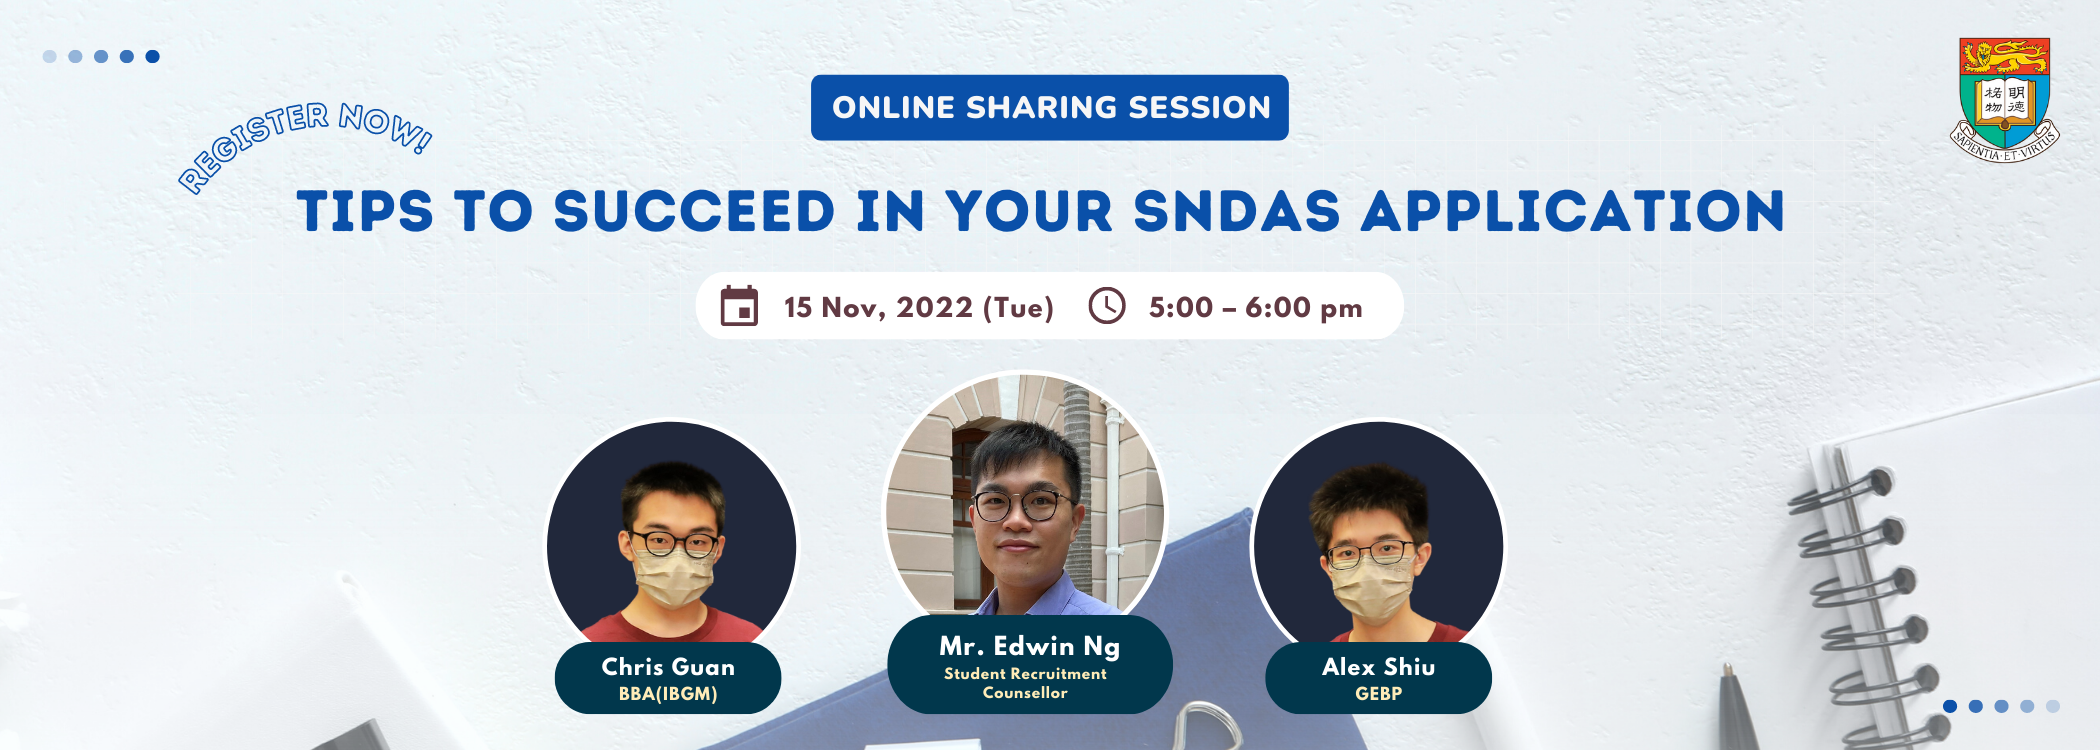 "Tips to Succeed in your SNDAS Application" 海报